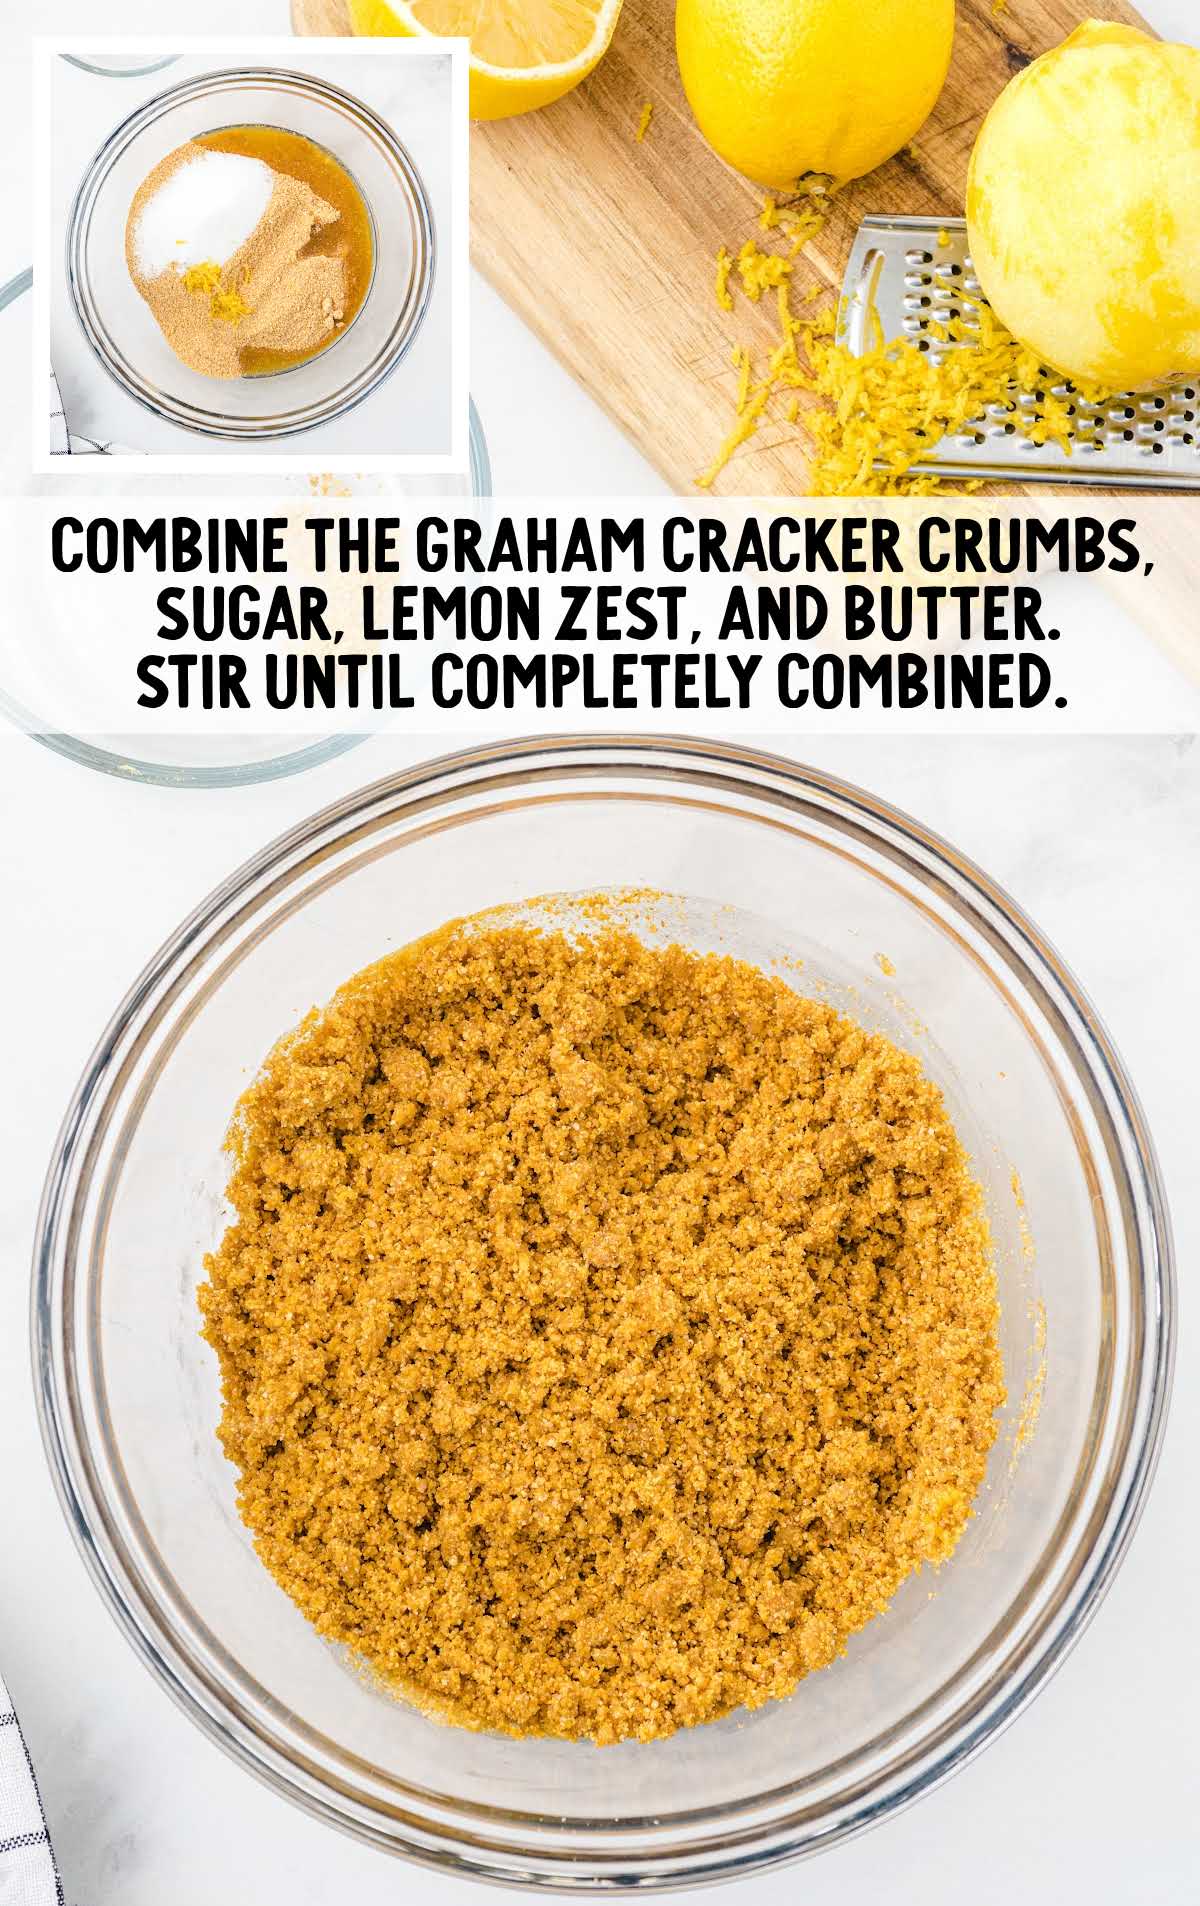 graham cracker crumbs, sugar, lemon zest, and butter combined in a bowl